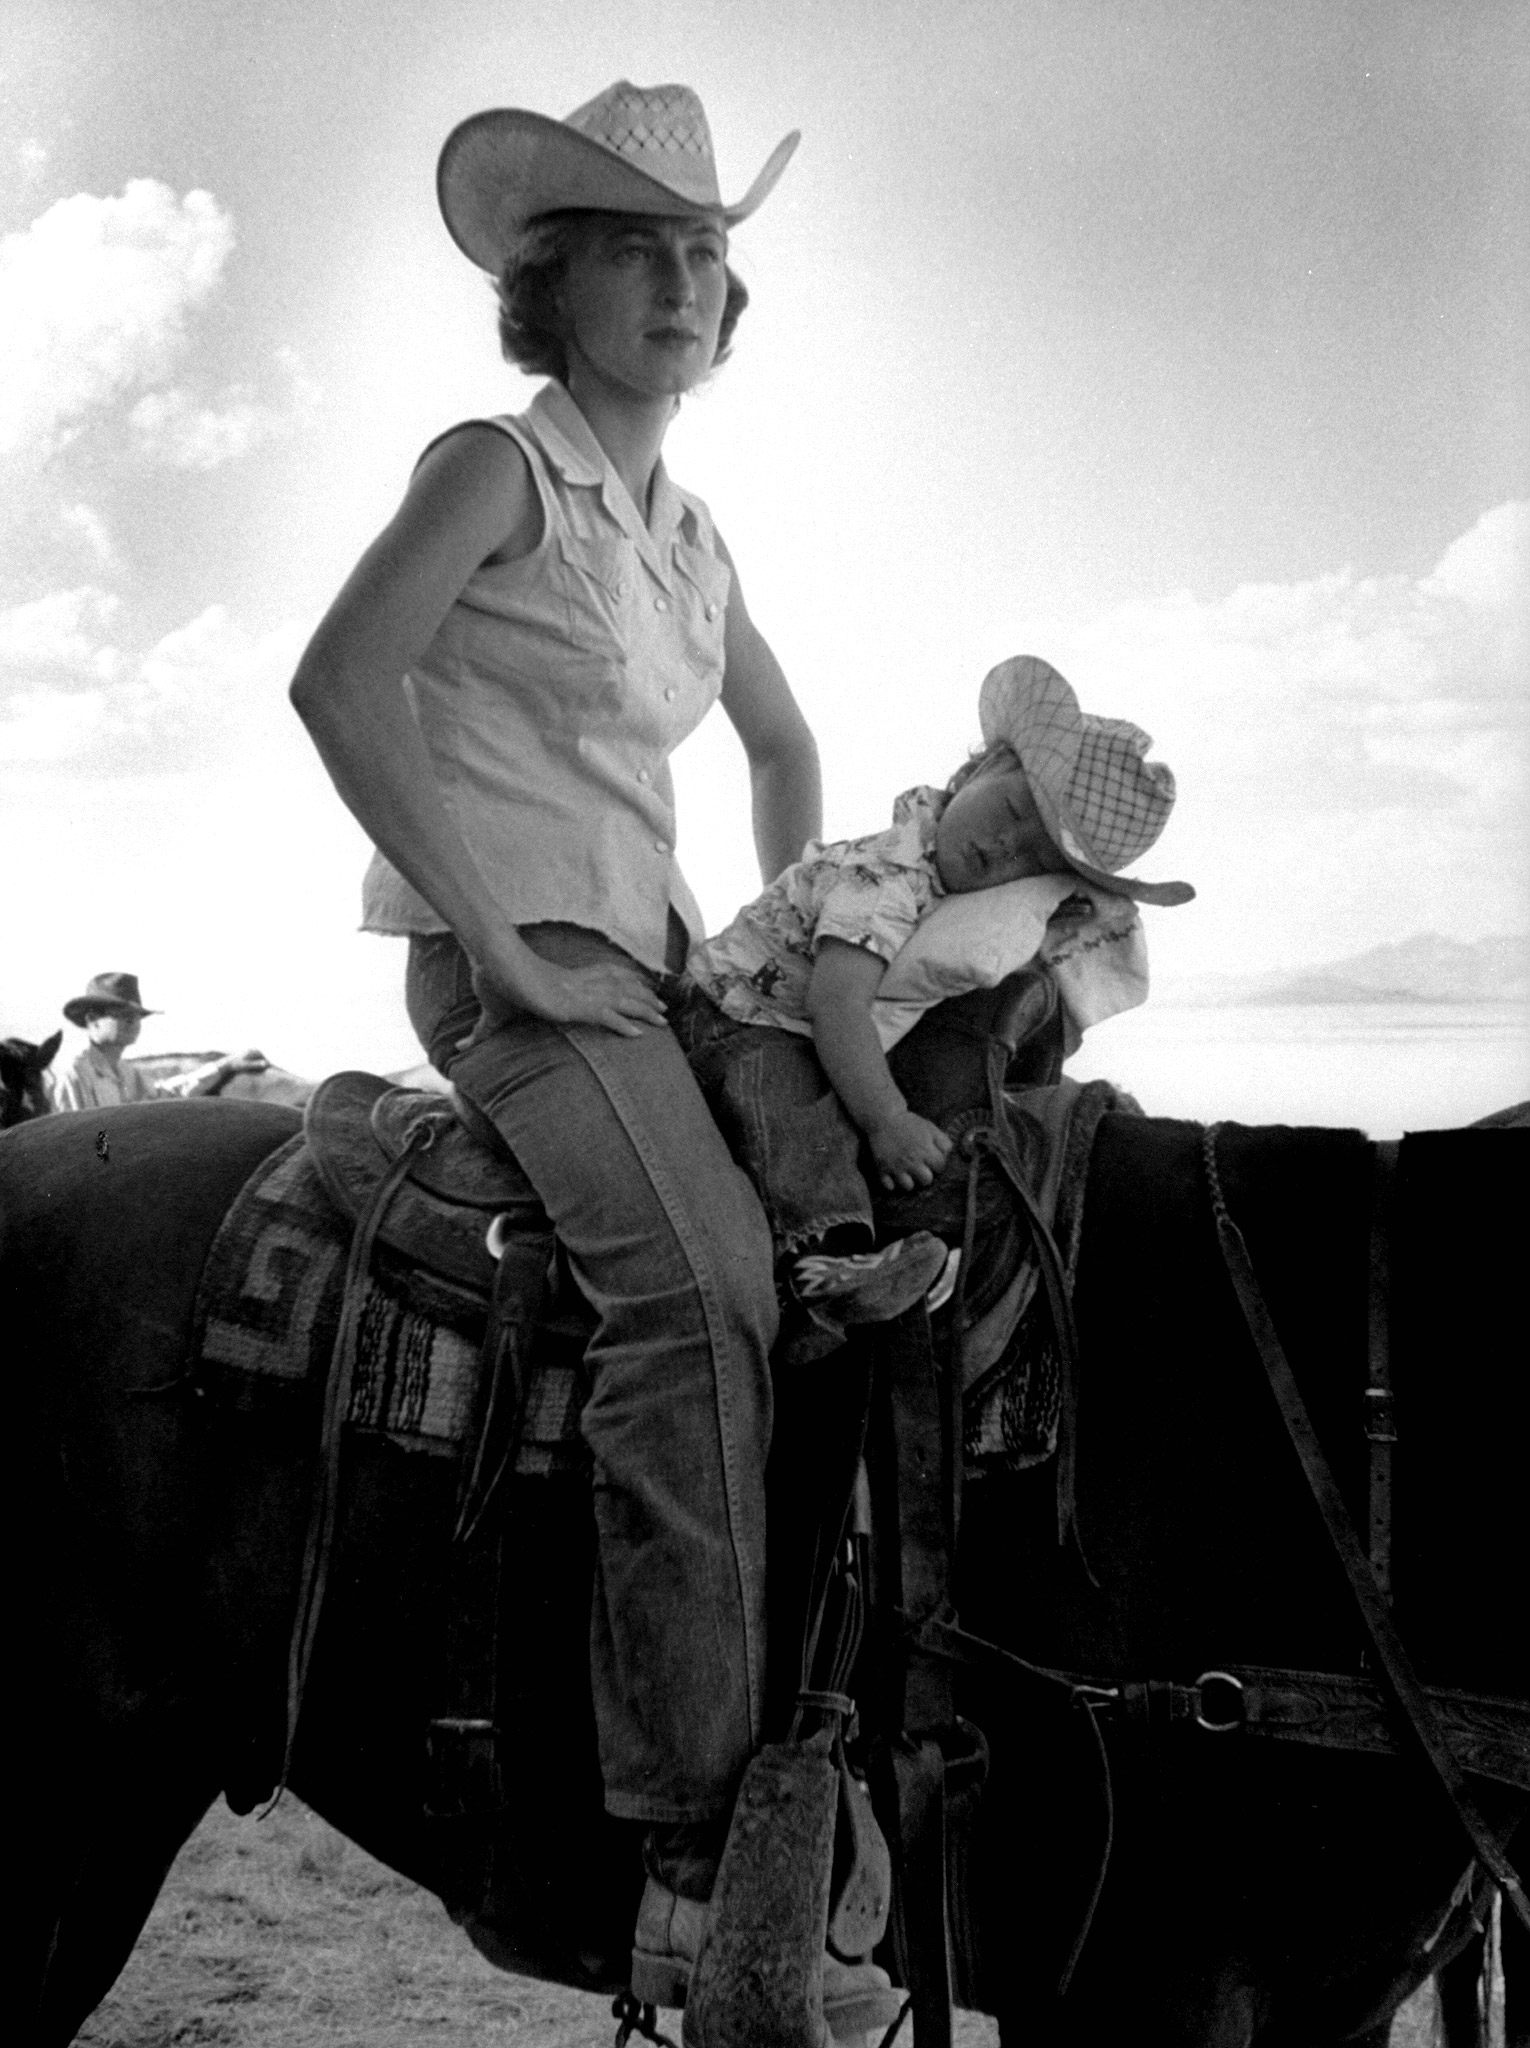 The Youngest Cowgirl in 1955